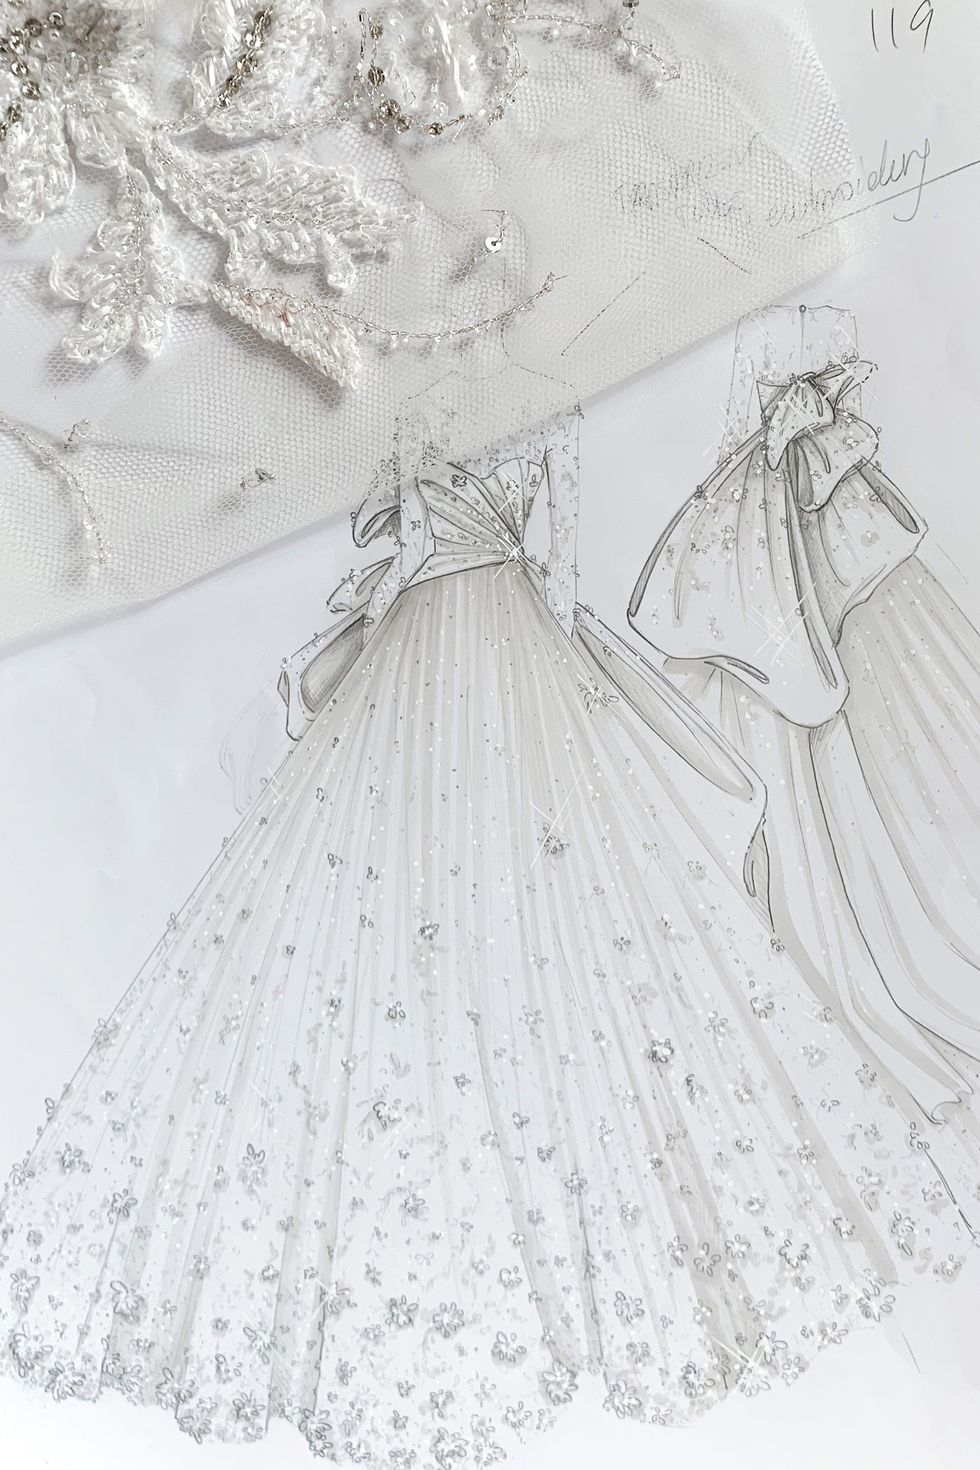 Ralph & Russo bridal gown couture autumn/winter 2019